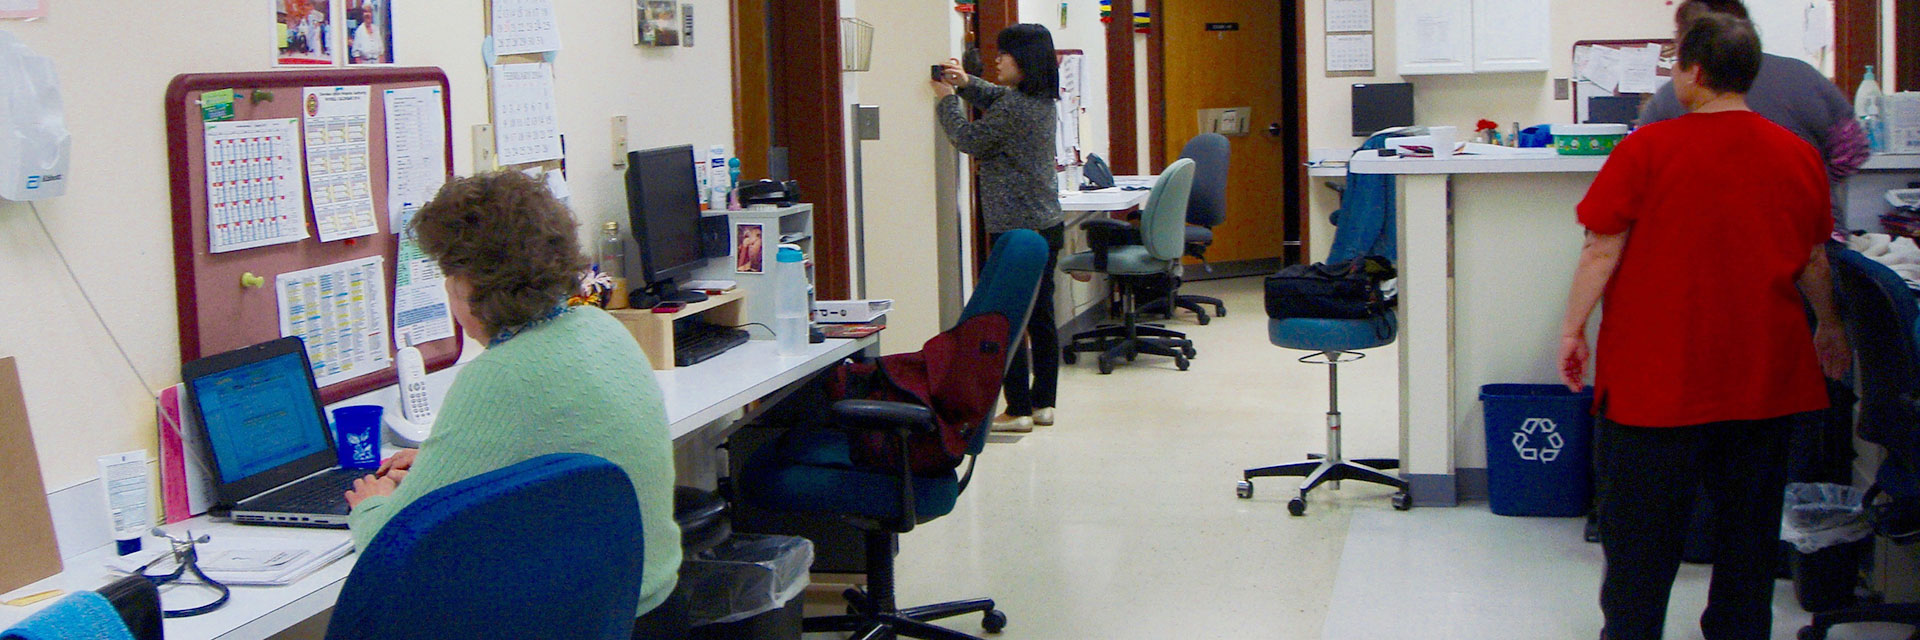 A researcher works in a medical office setting.